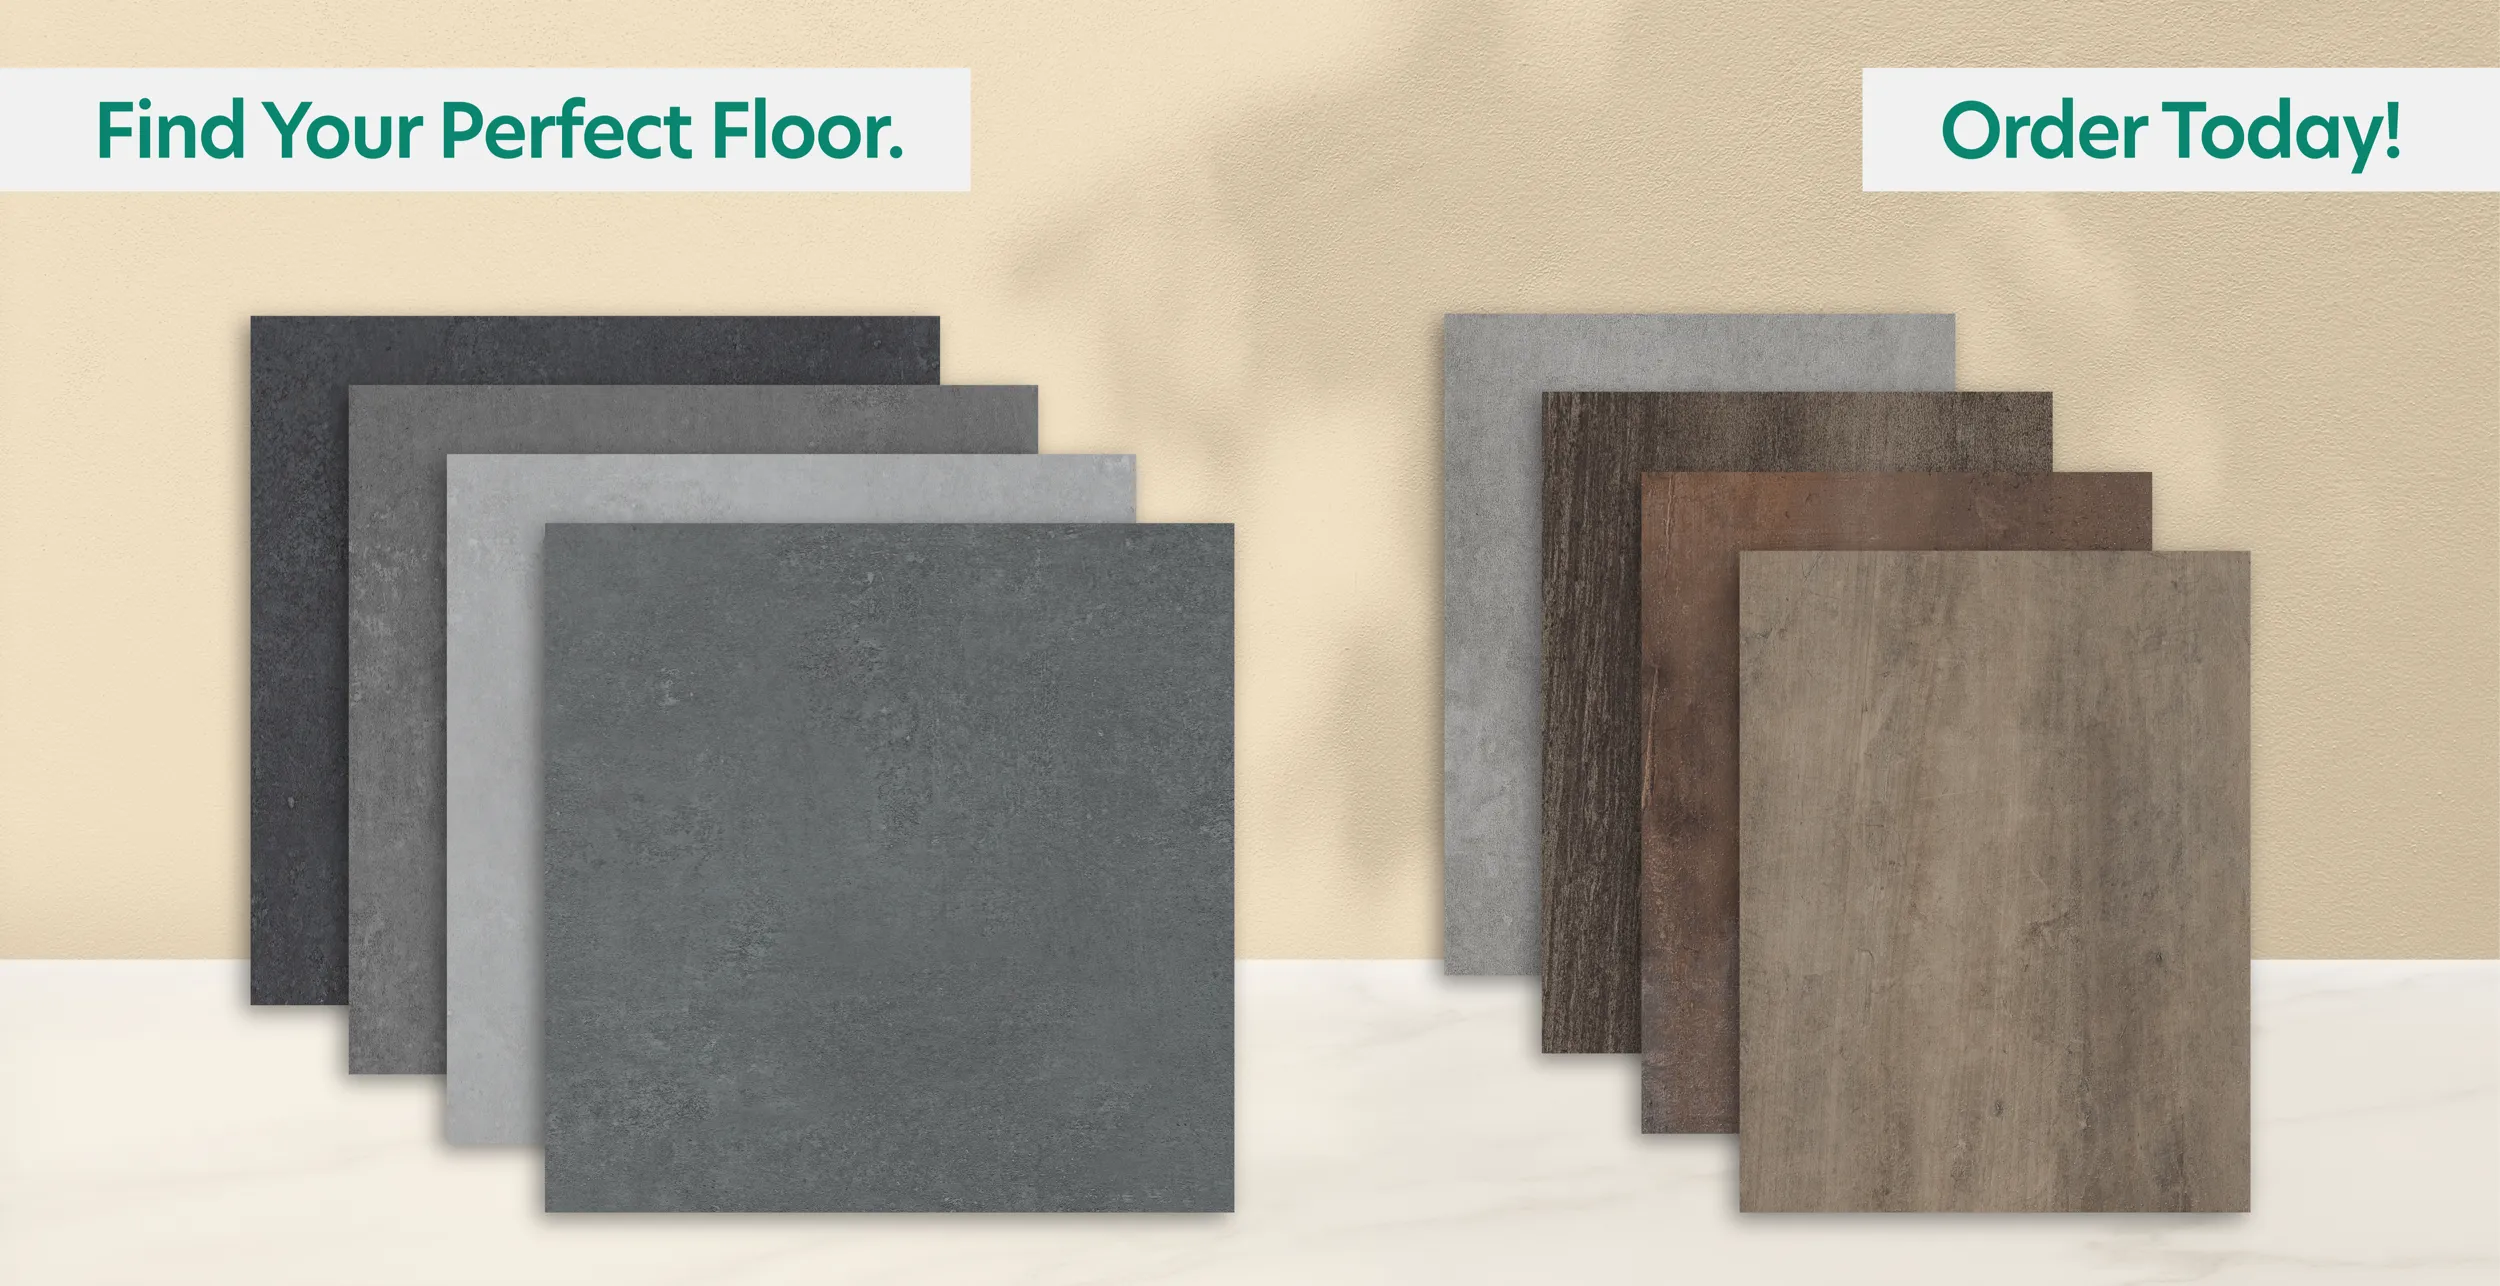 Flooring samples with "Find Your Perfect Floor" and "Order Today".